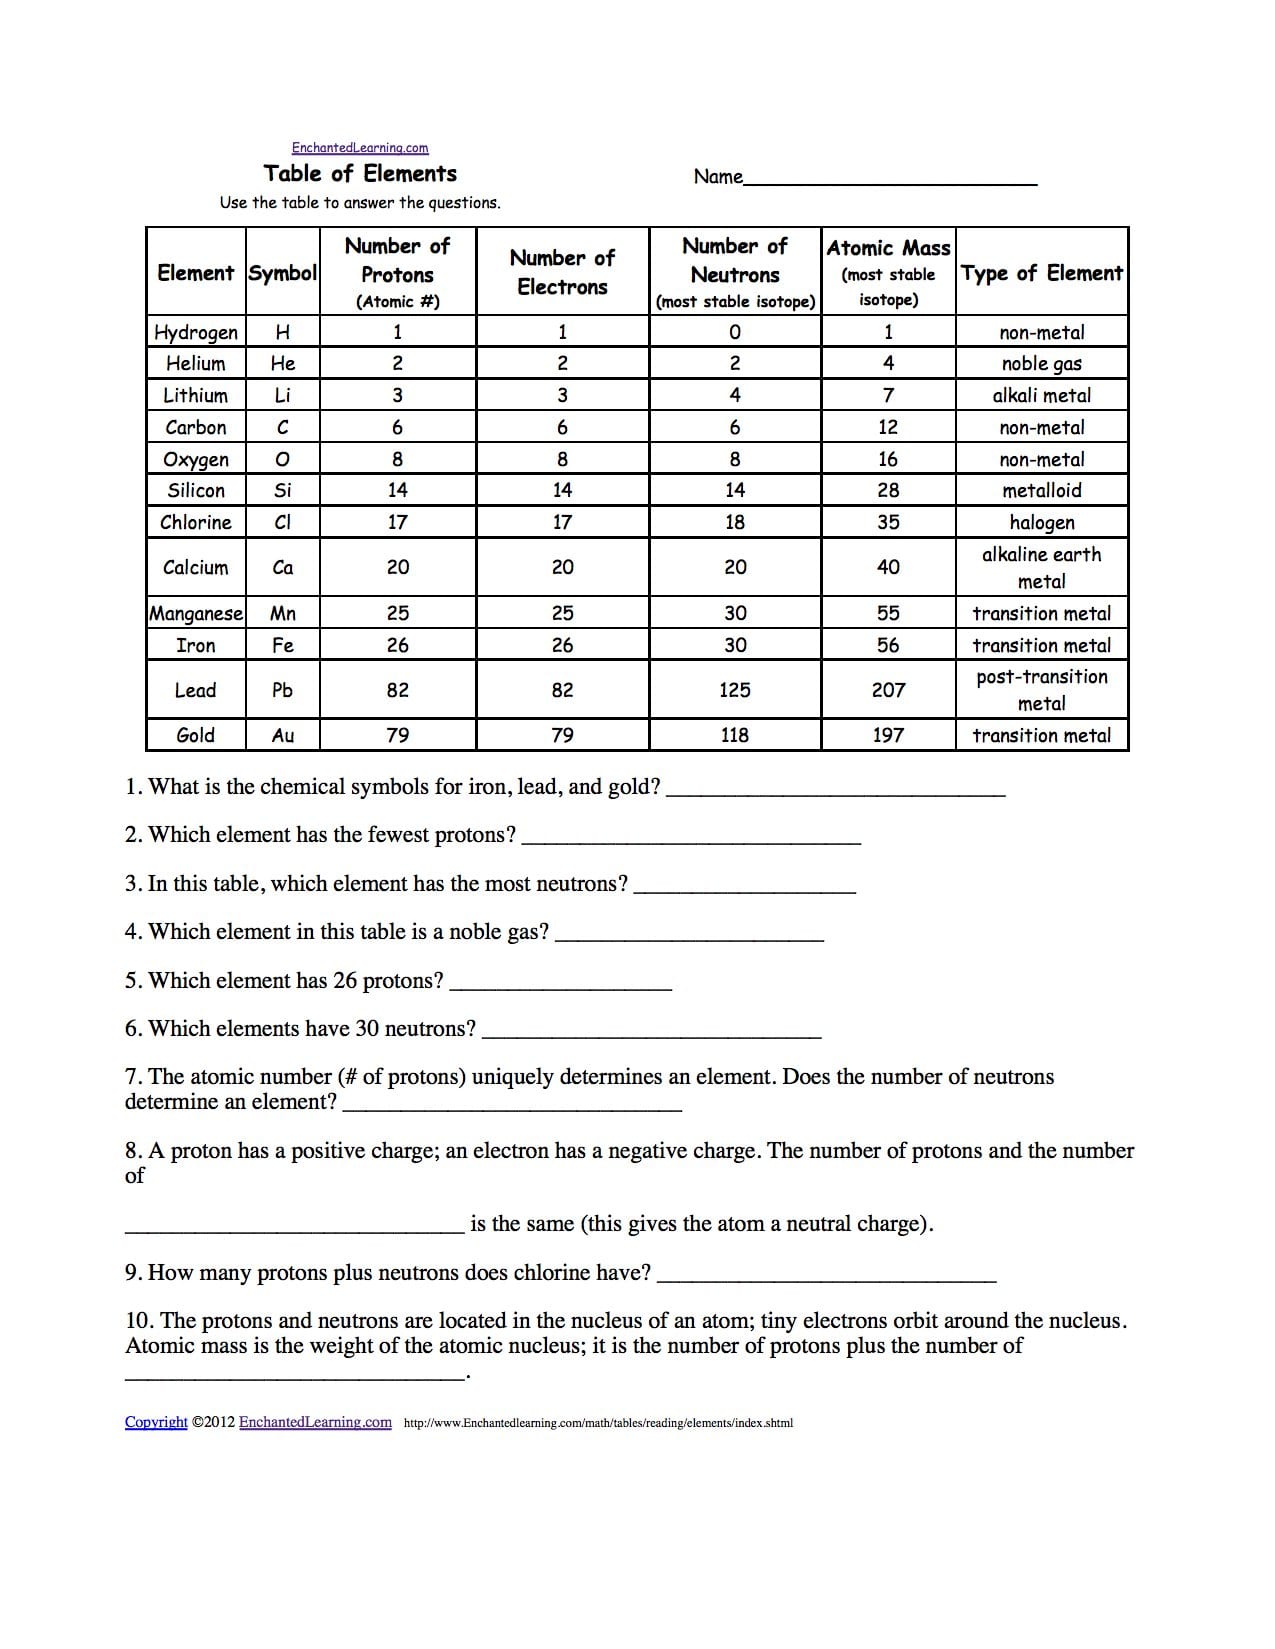 Elements And Their Properties Worksheet Answers  Yooob Throughout Elements And Their Properties Worksheet Answers